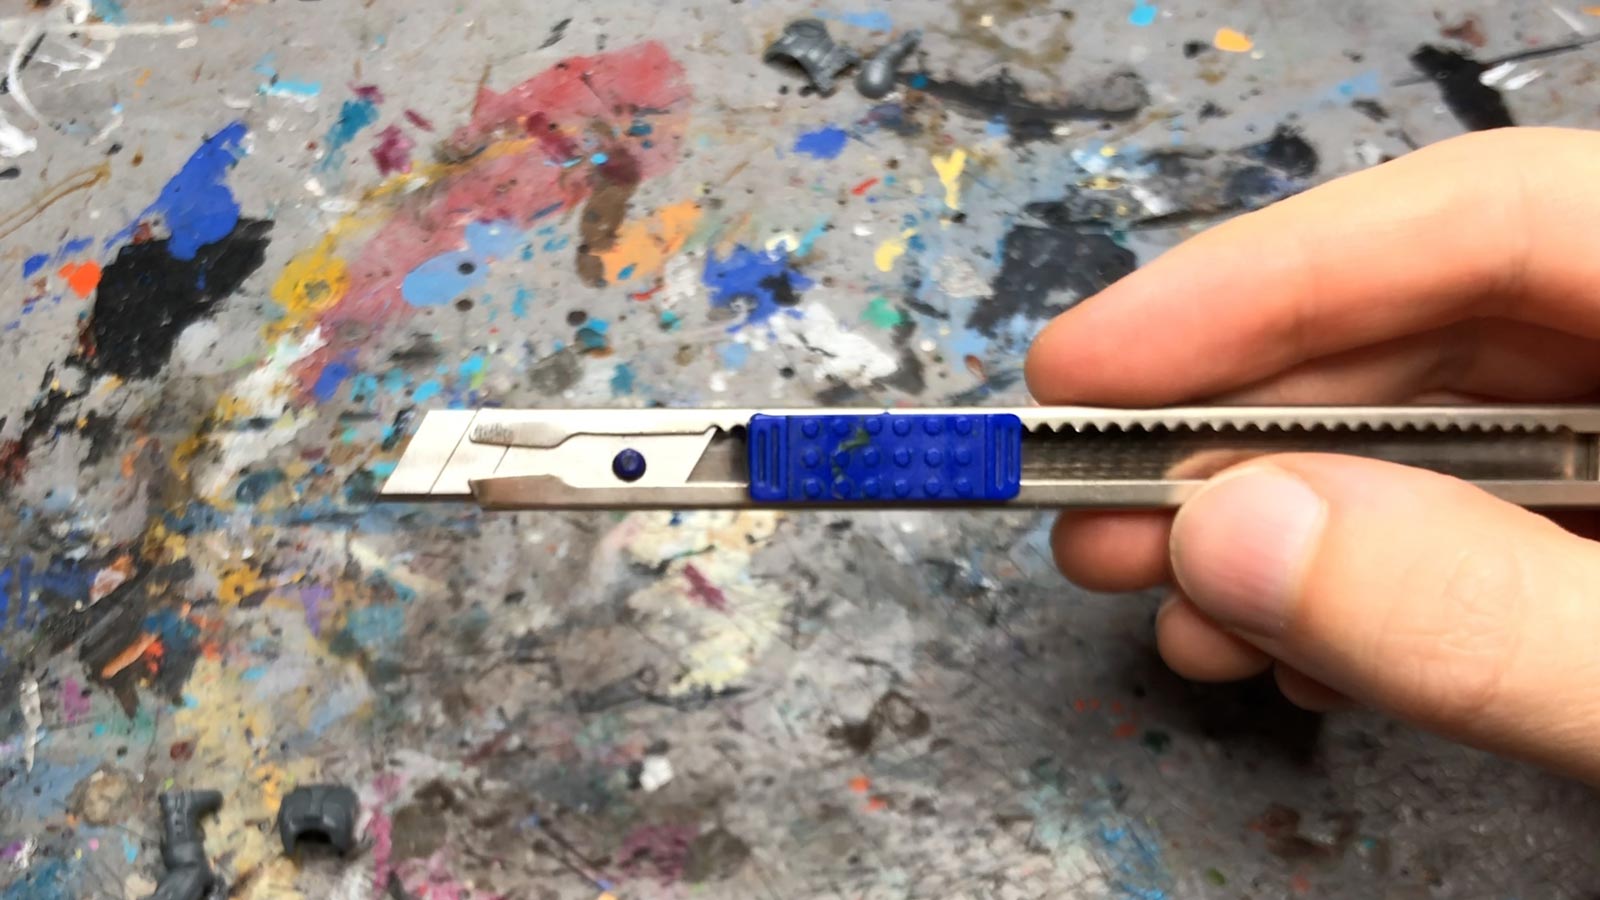 A metal snap-off hobby knife